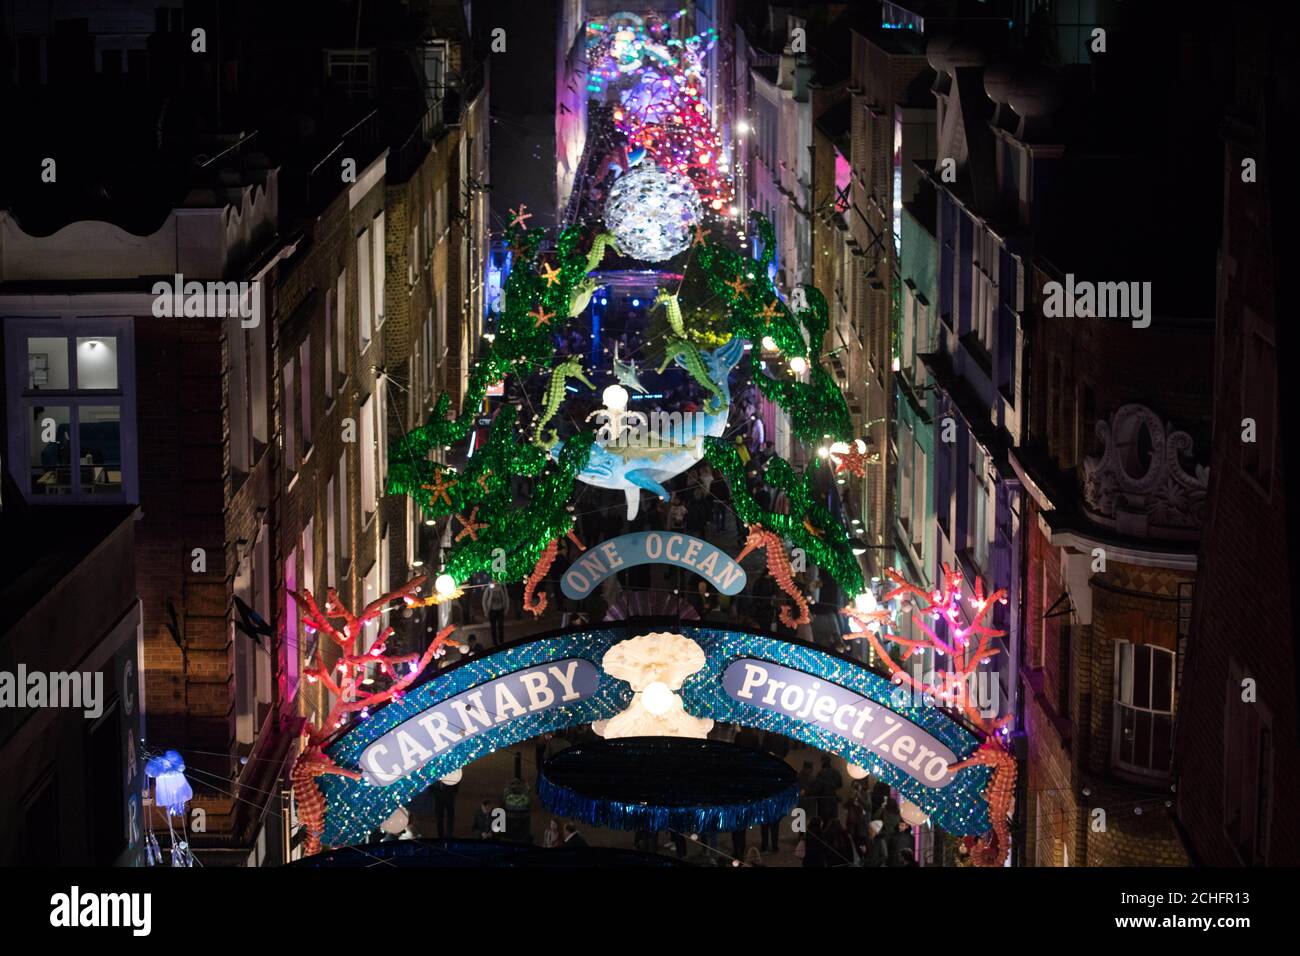 https://c8.alamy.com/comp/2CHFR13/editorial-use-only-the-new-sustainable-ocean-themed-christmas-light-installation-in-carnaby-london-in-partnership-with-ocean-conservation-charity-project-zero-a-photo-picture-date-thursday-november-7-2019-sustainability-is-the-theme-of-the-installation-with-every-element-using-recycled-and-reusable-materials-including-repurposed-fishing-netting-for-the-green-kelp-over-500m-of-post-use-bubble-wrap-repurposed-for-coral-and-over-1500-recycled-plastic-bottles-for-fish-and-bubbles-photo-credit-should-read-david-parrypa-wire-2CHFR13.jpg